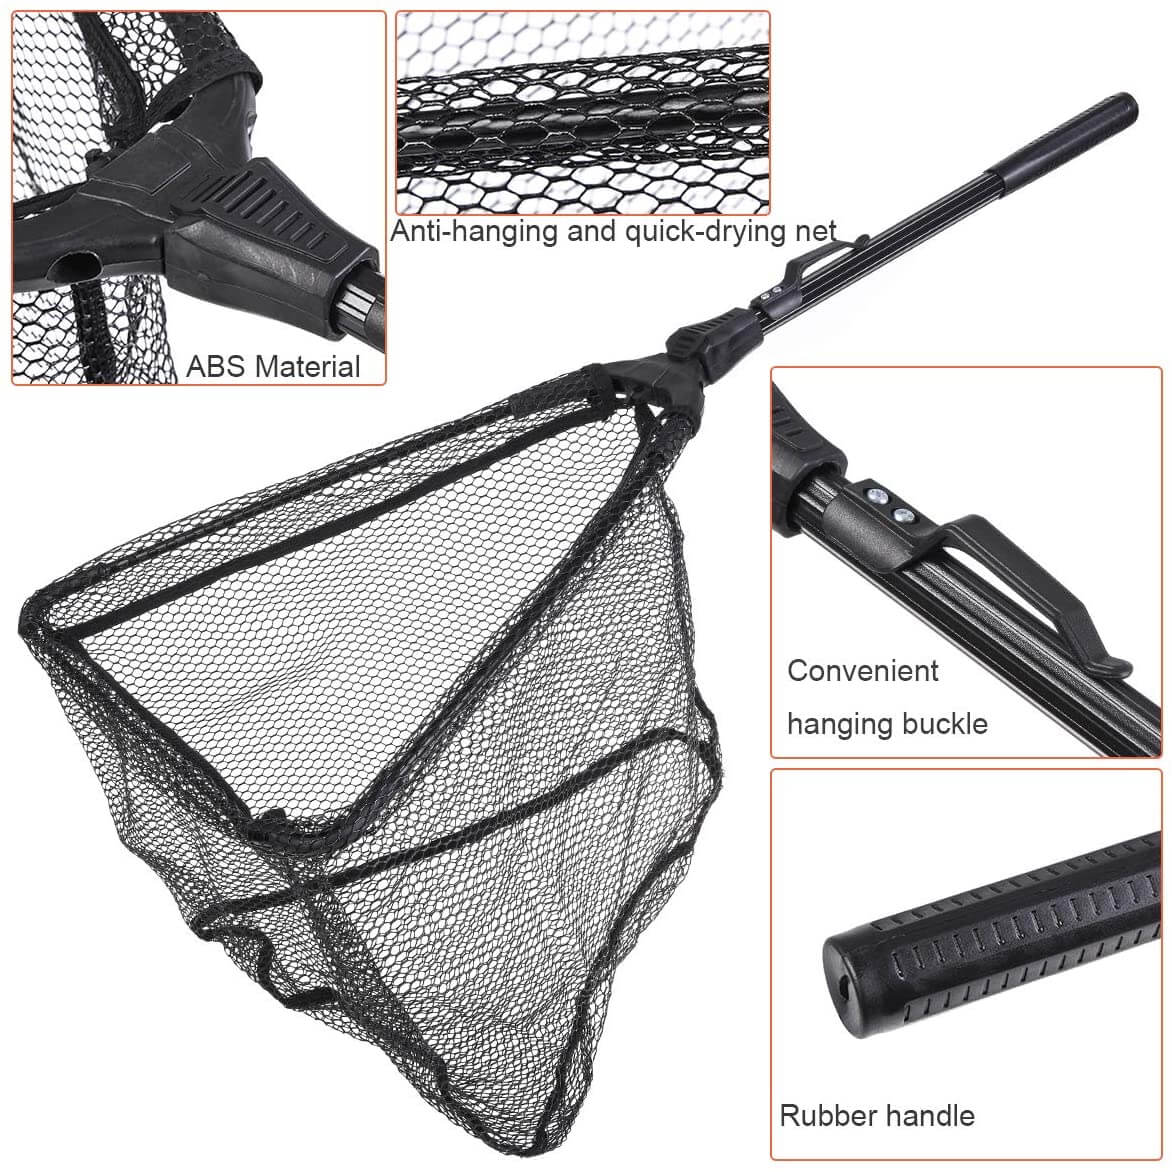 Foldable Collapsible Telescopic Fishing Net Durable Strong Safe Catch and Release Fish Landing Net FN001 16/40CM